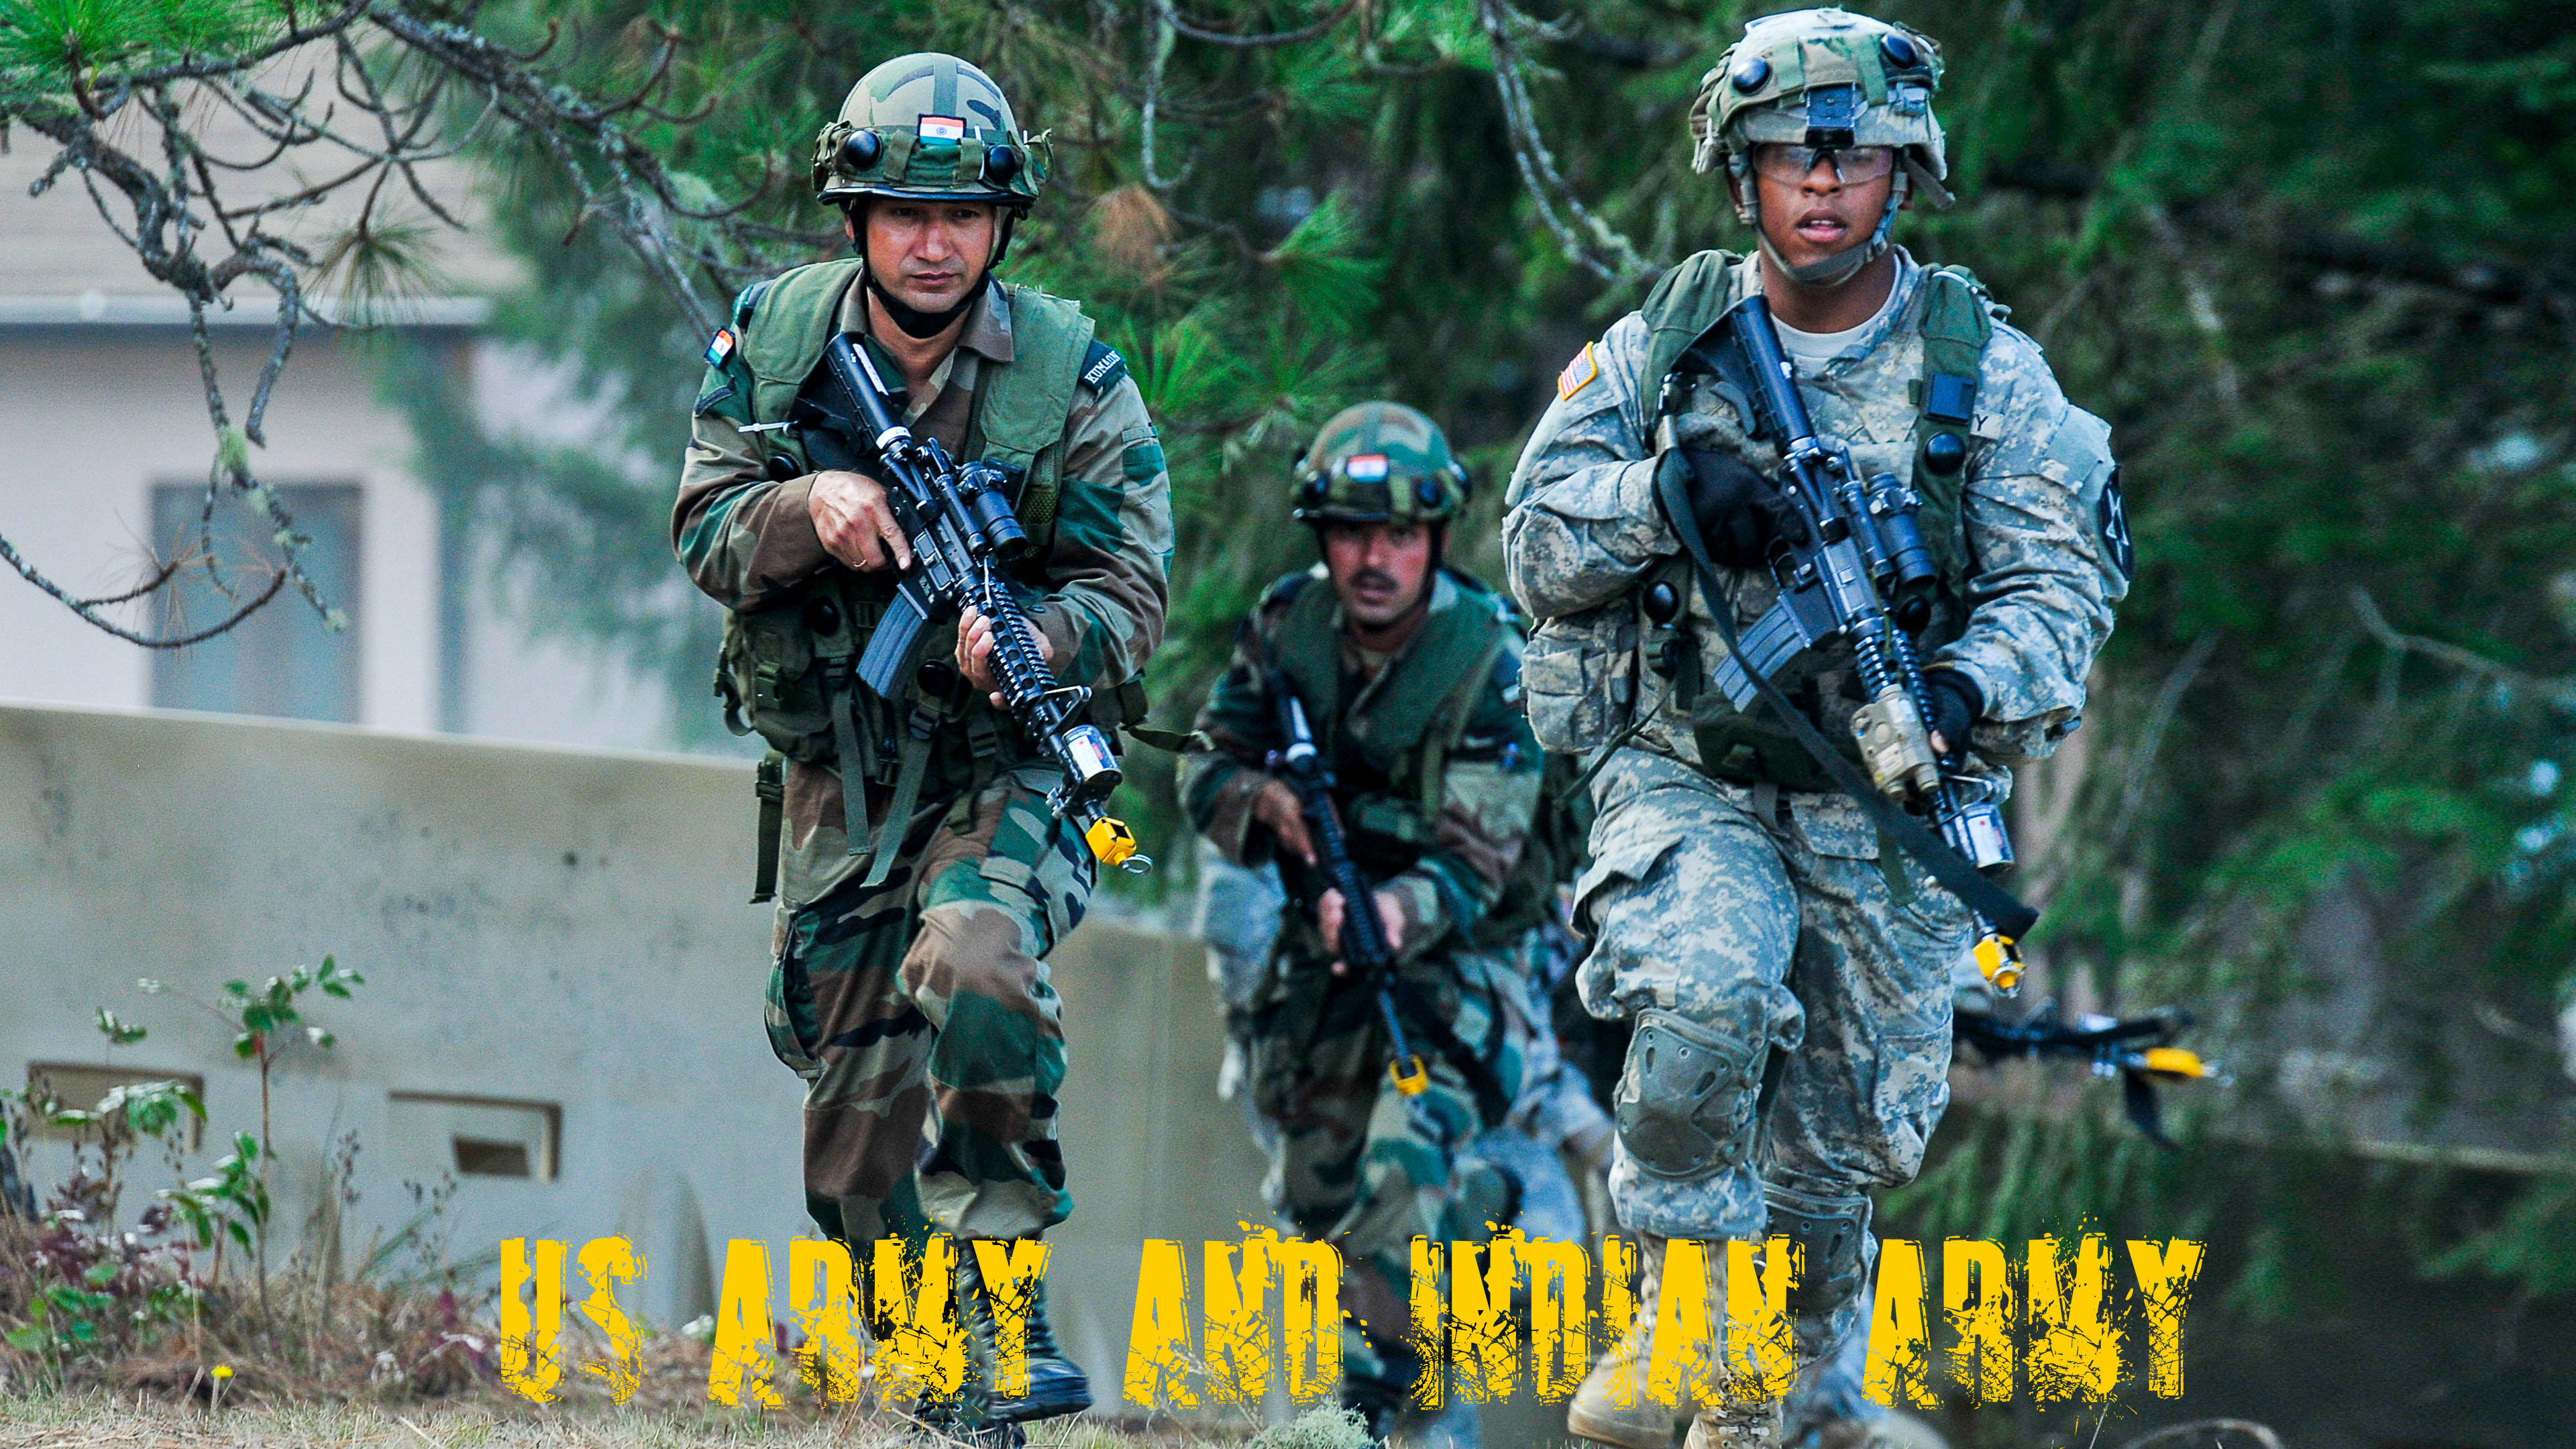 indian army photos wallpaper,army,soldier,military,infantry,military camouflage